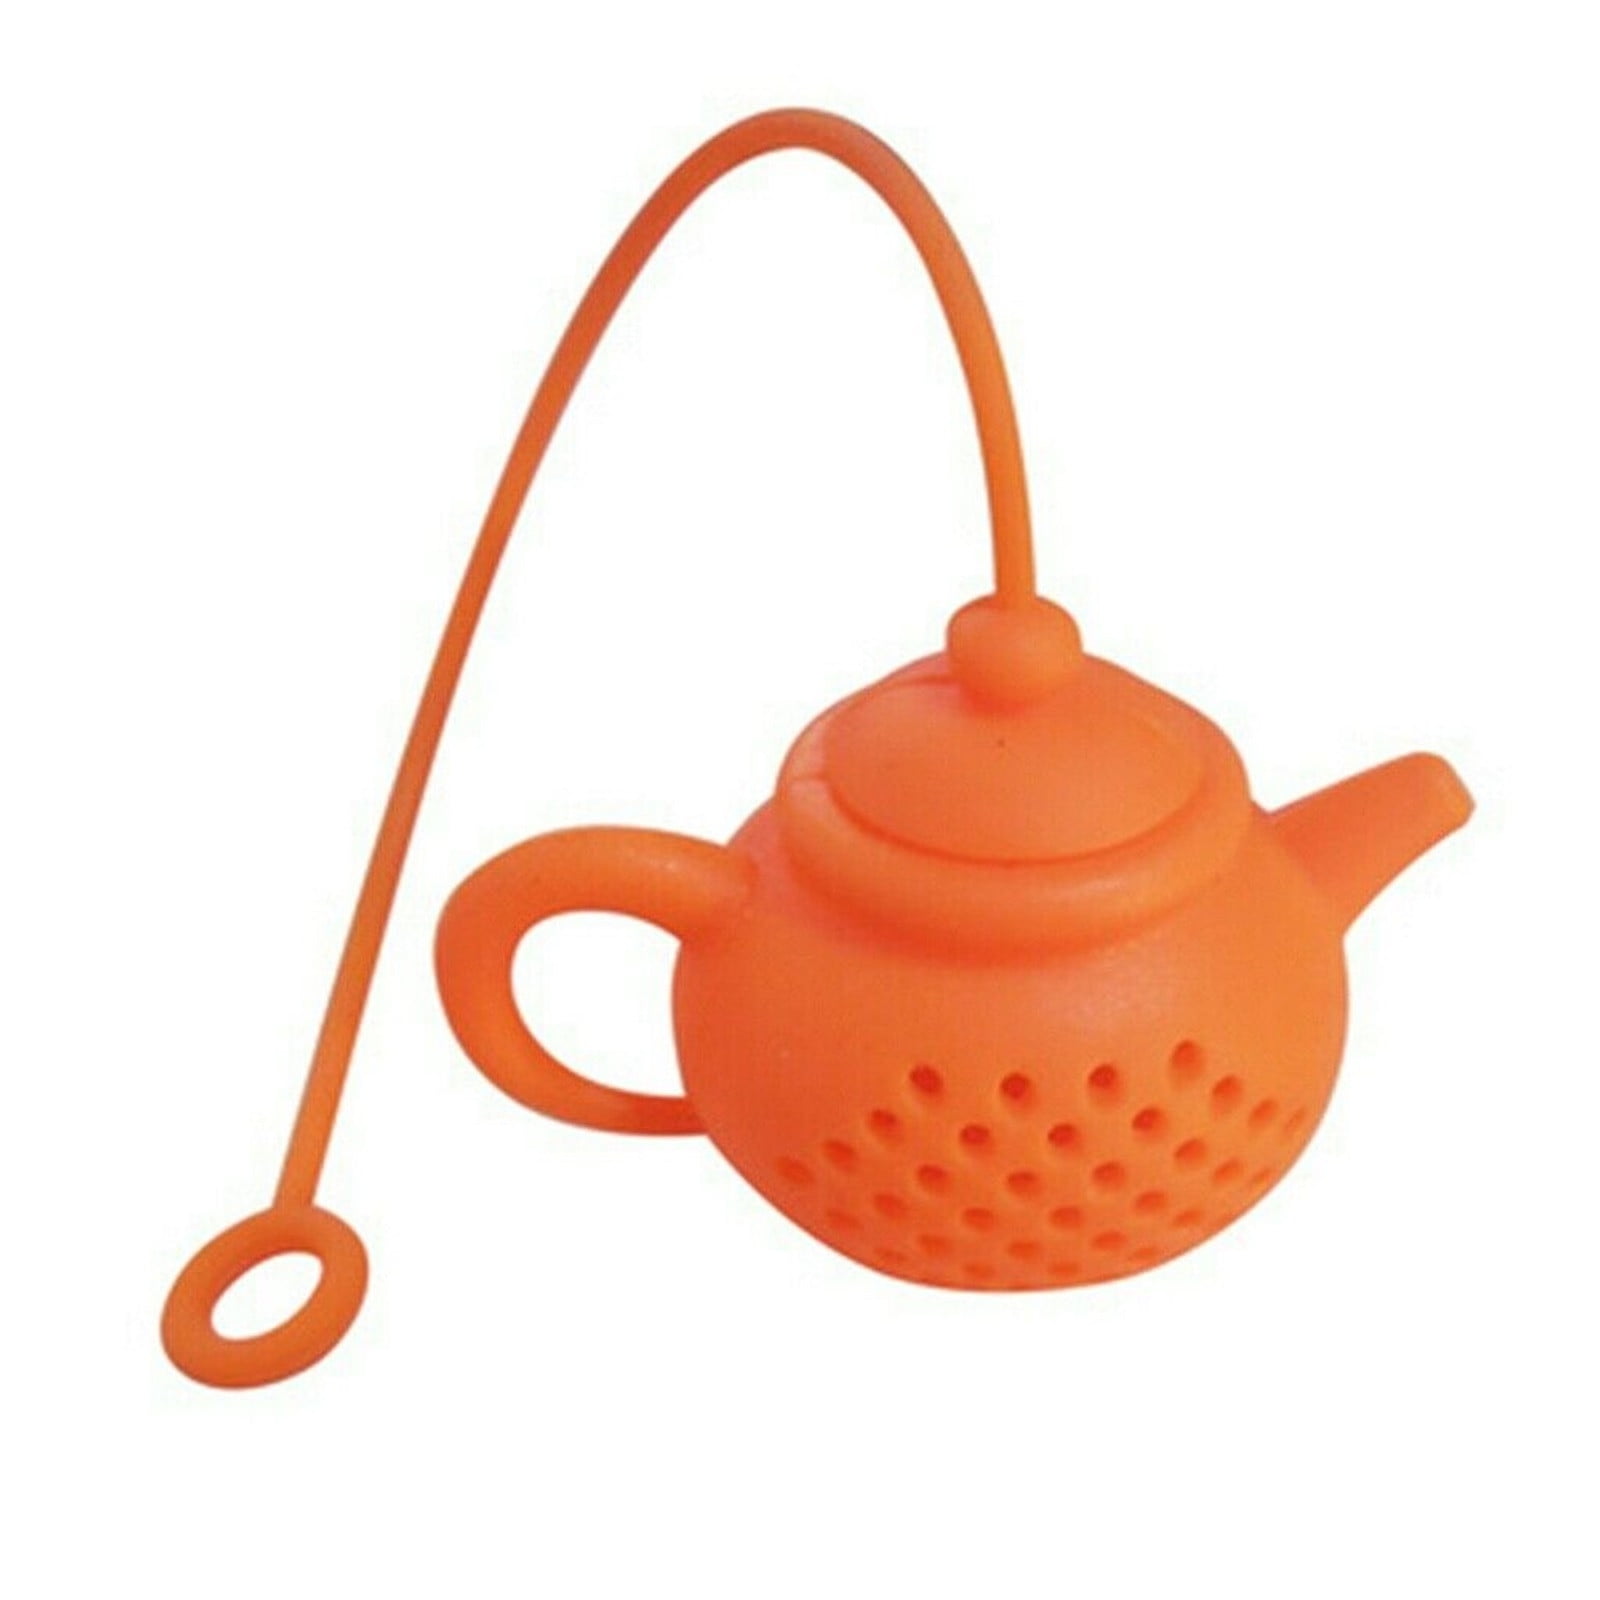 Blue Teapot-Shaped Silicone Tea Infuser New 